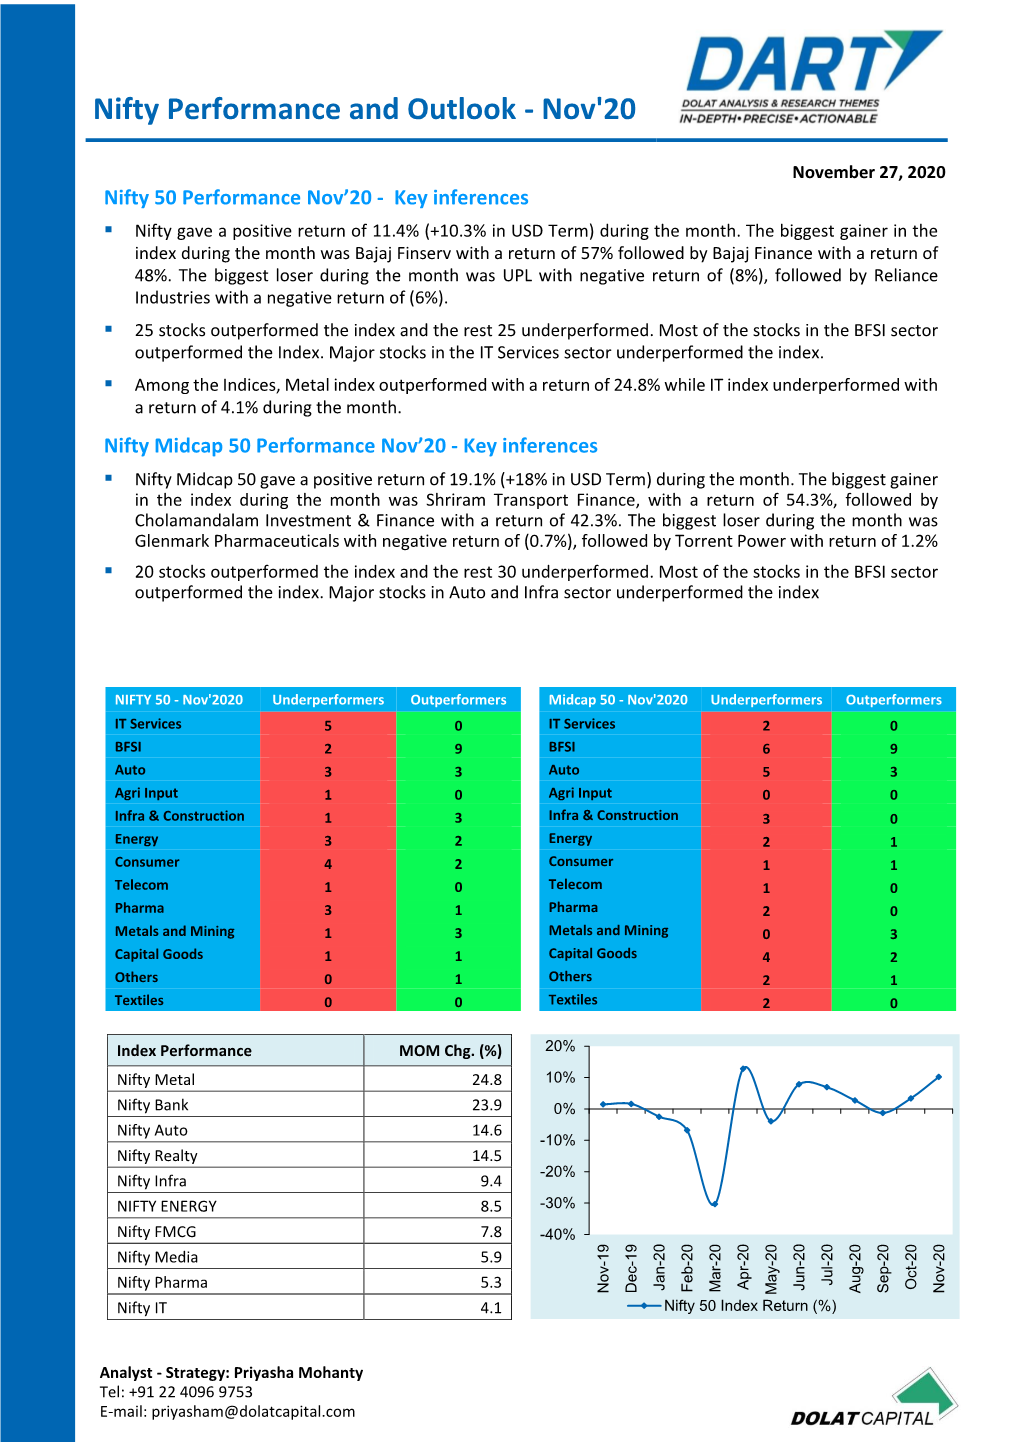 Nifty Performance and Outlook - Nov'20